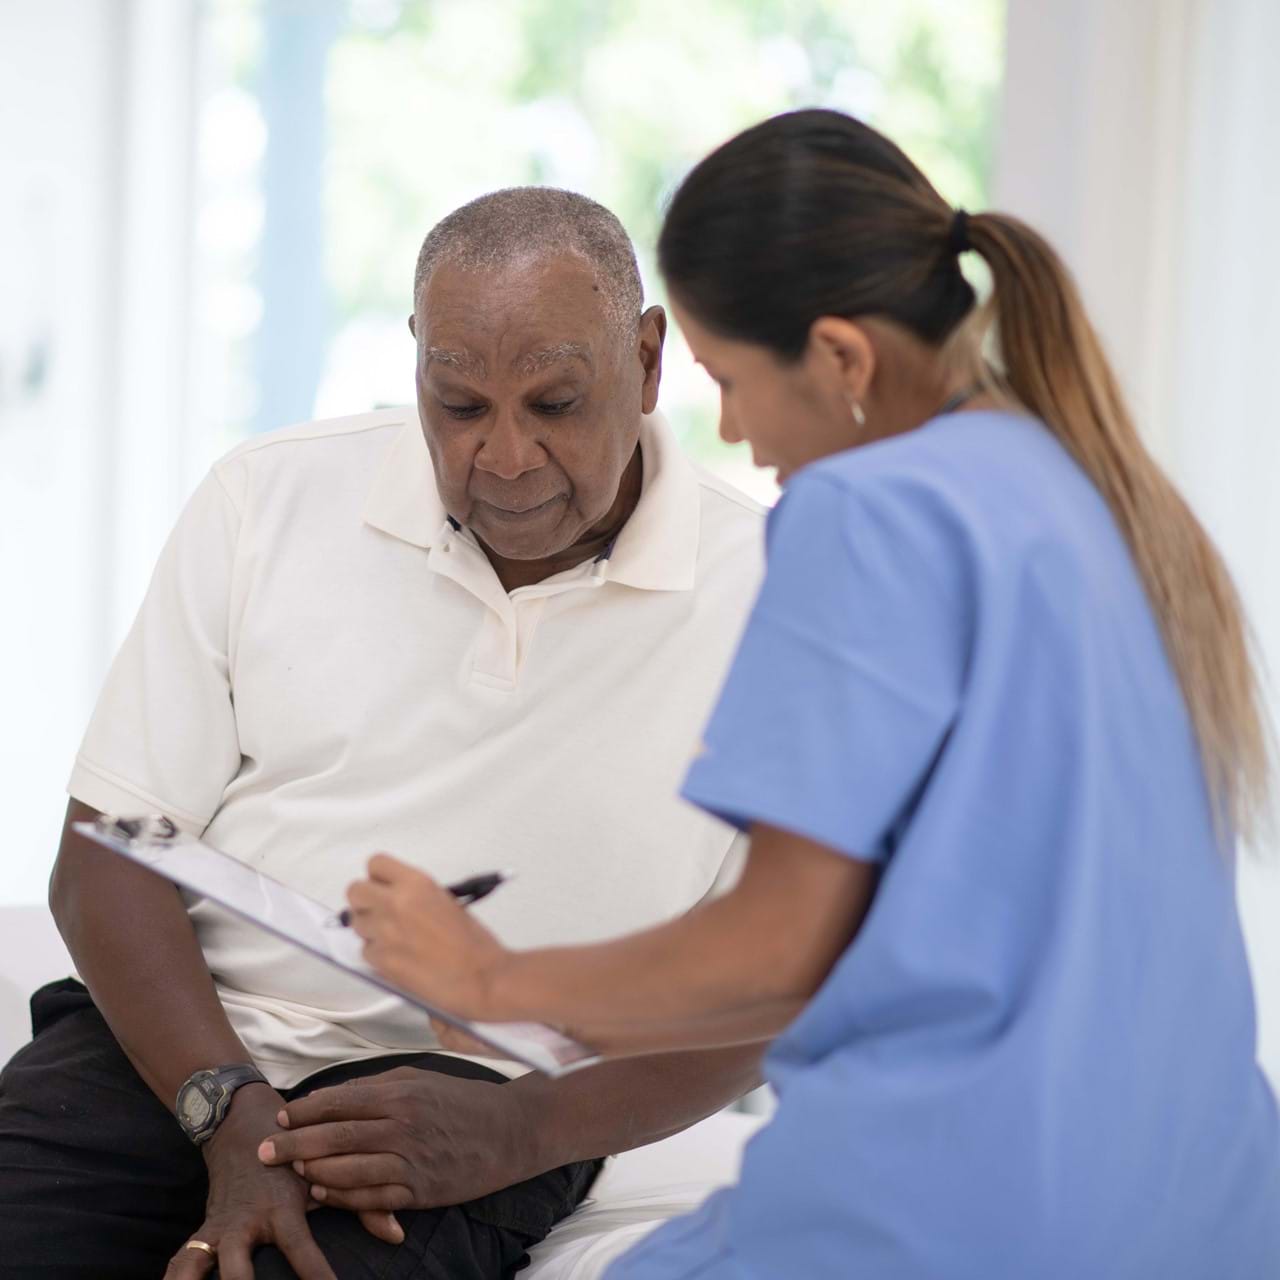 Medical staff talking with elderly patient